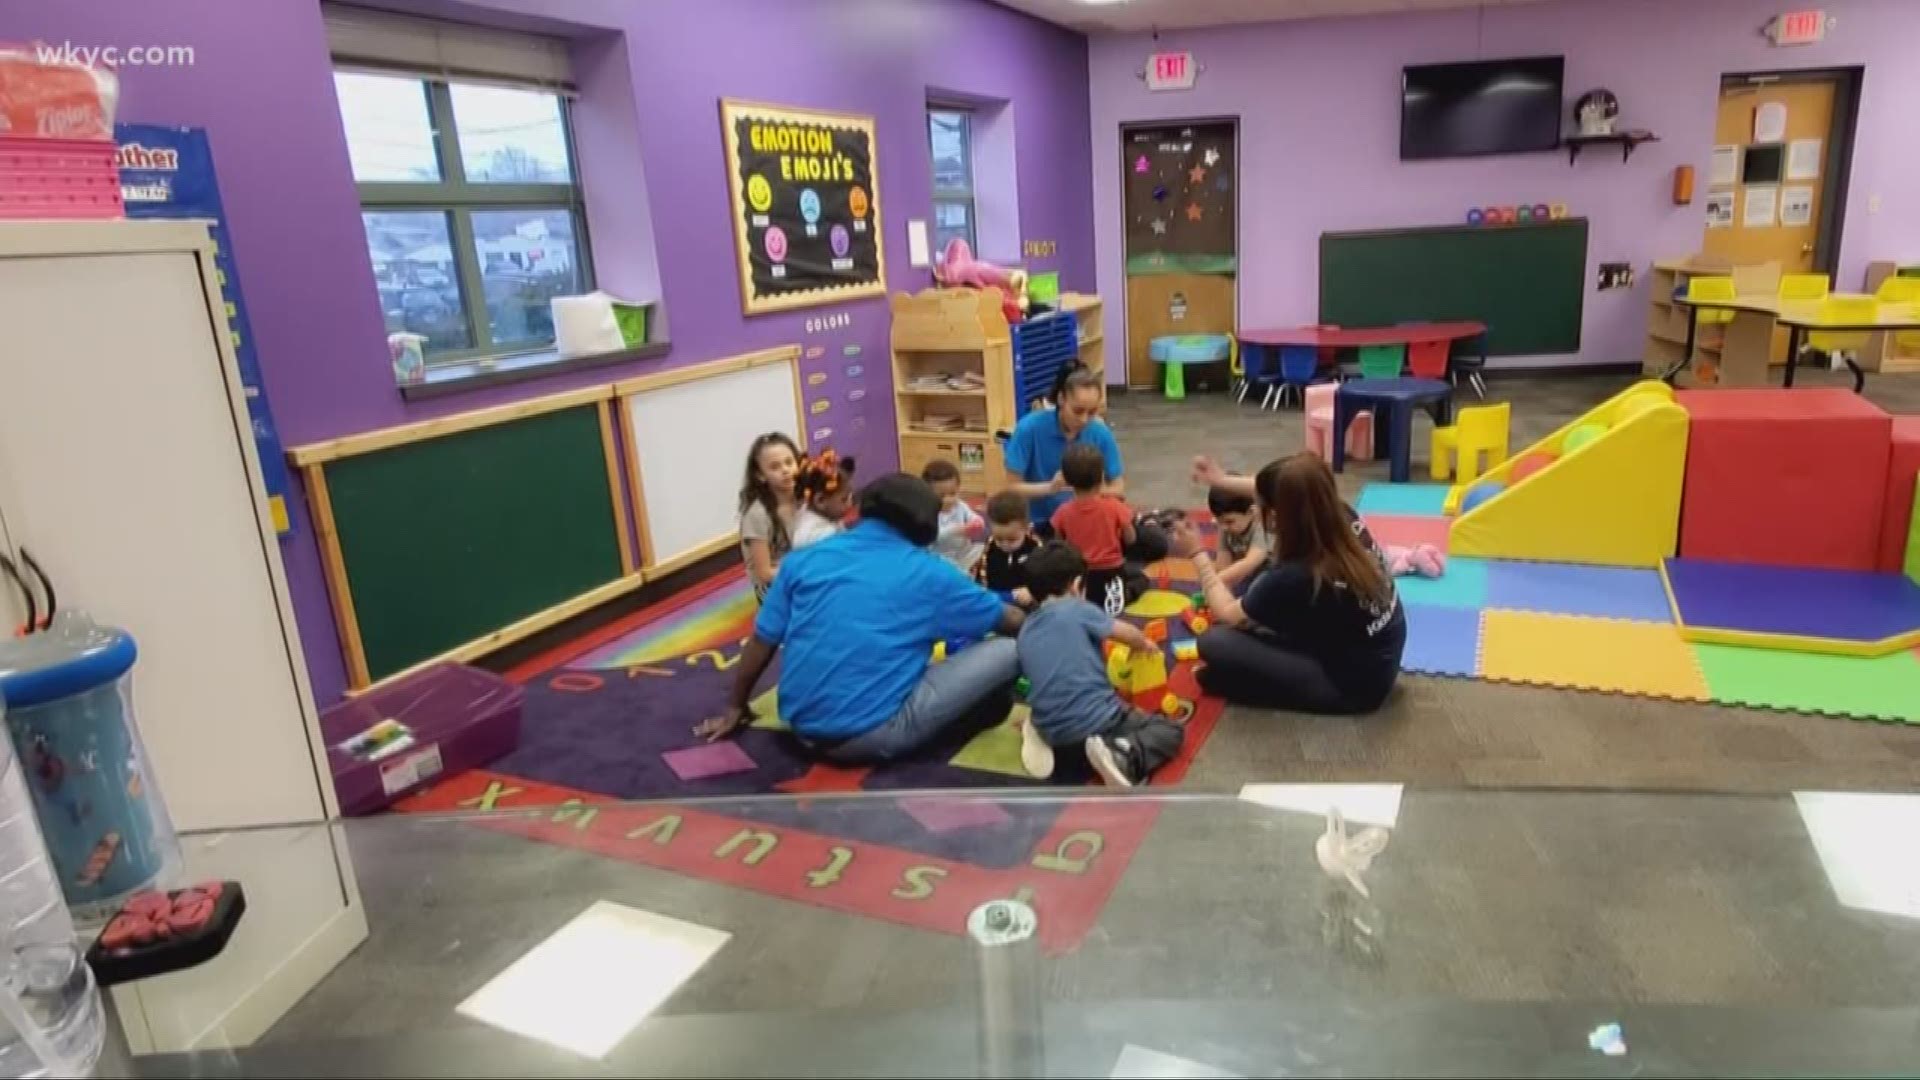 Daycares in Ohio remain open for now, but there is a concern that could soon change. On Friday, Governor Mike DeWine stressed he will do what he must to save lives.